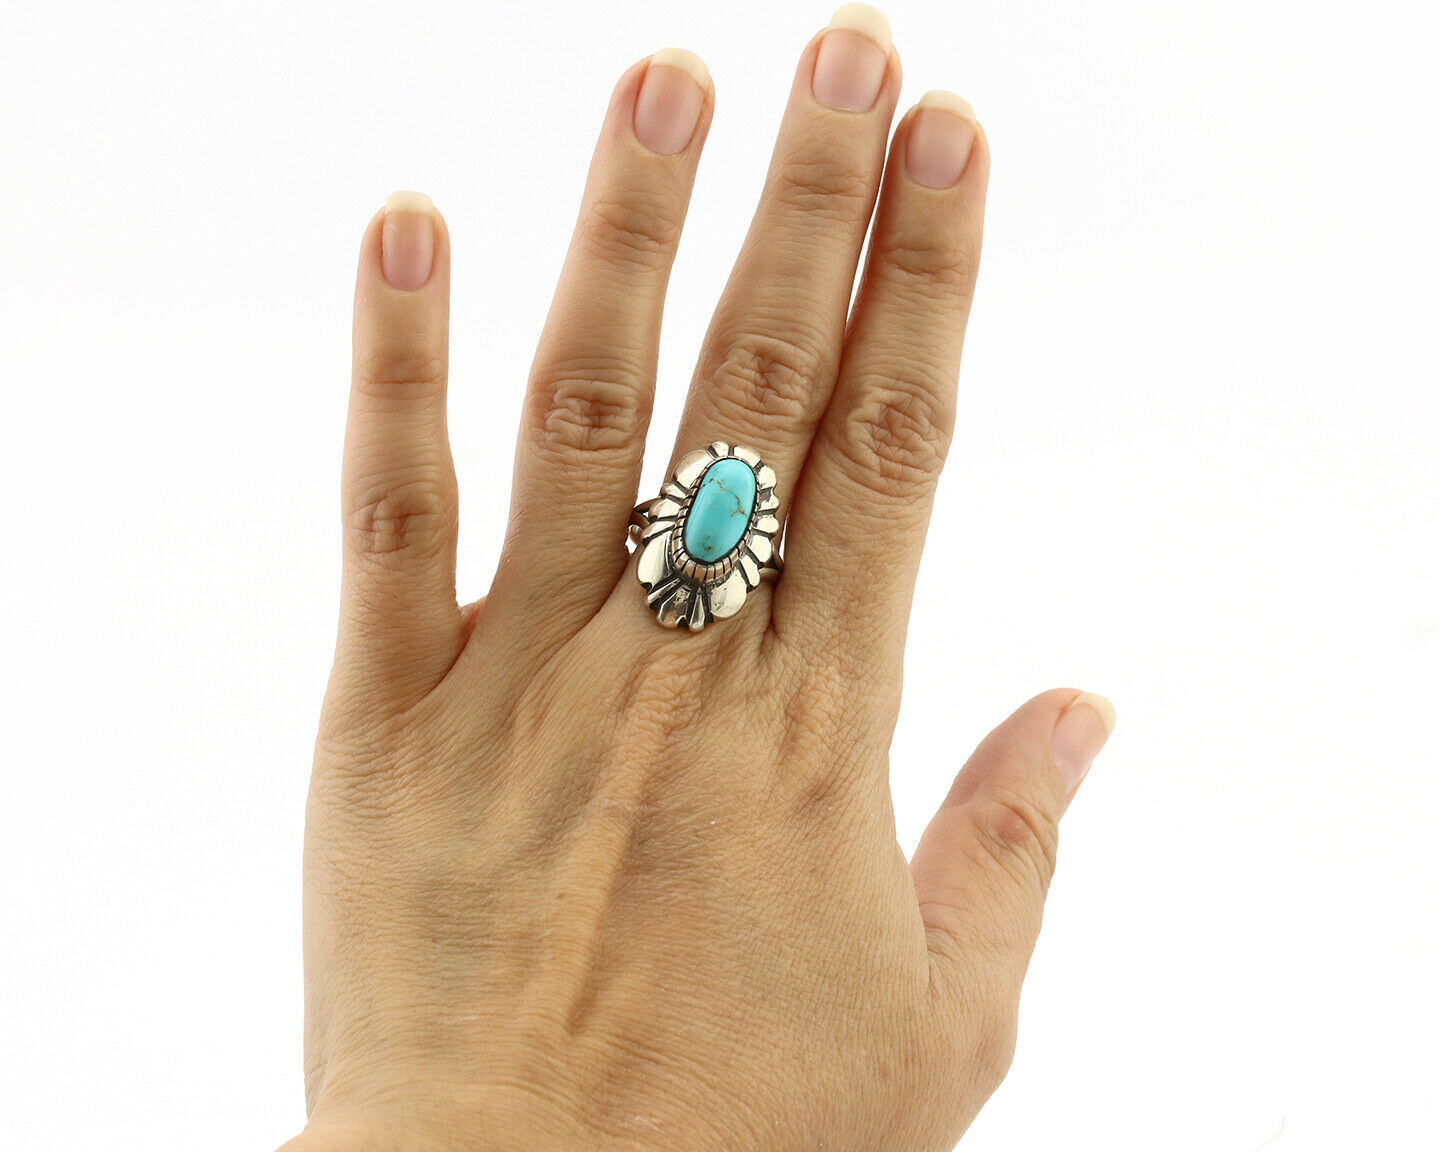 Navajo Ring .925 Silver Natural Mined Turquoise Artist Signed M Montoya C.80's